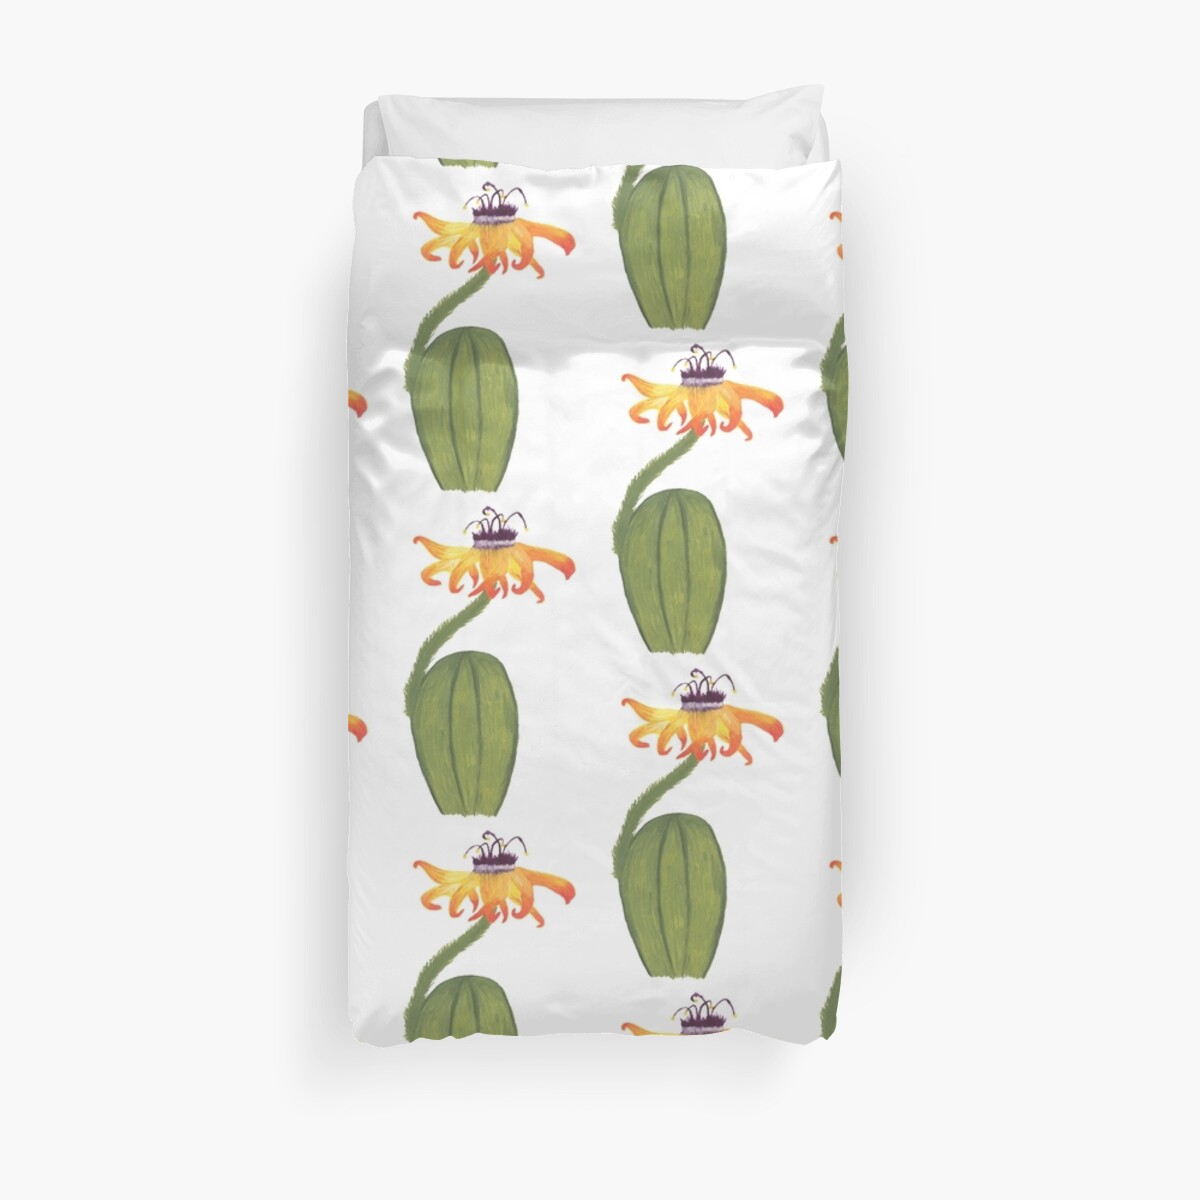 Original Cool Funky Cactus Iphone Case Duvet Cover By Ofschlaich